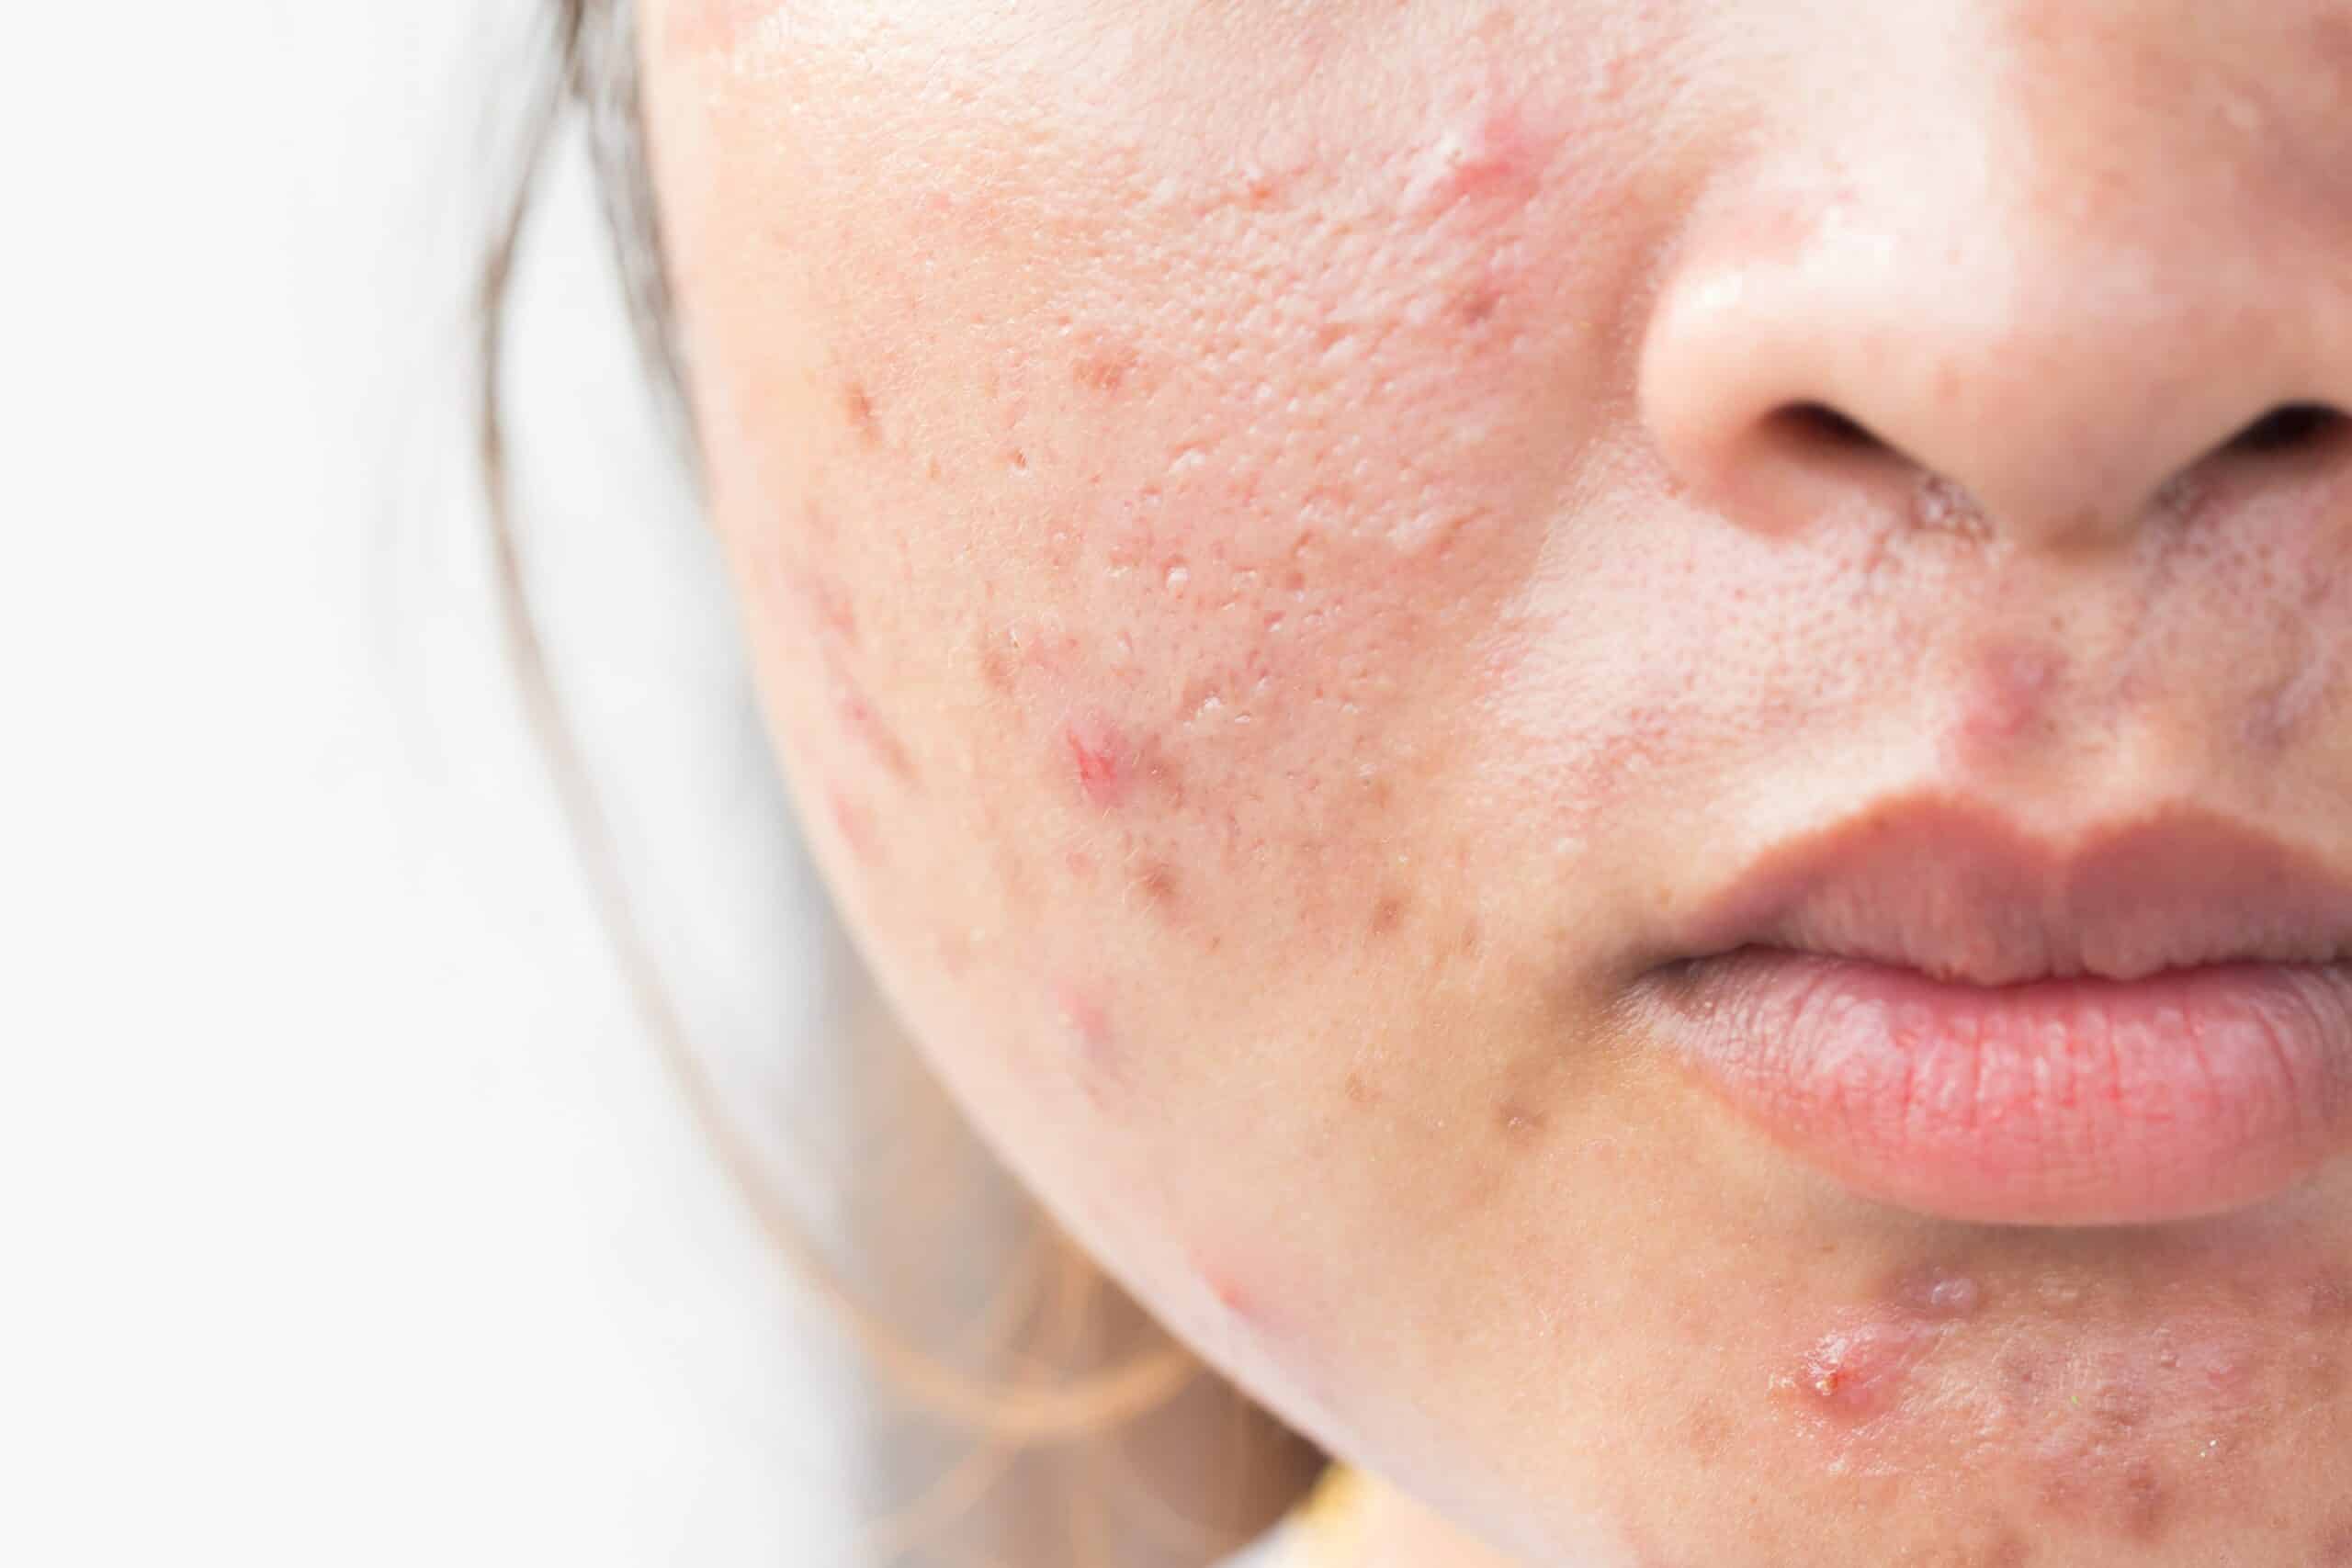 Pico Laser For Acne Scar Removal: Better And Safer? | Dream Plastic Surgery